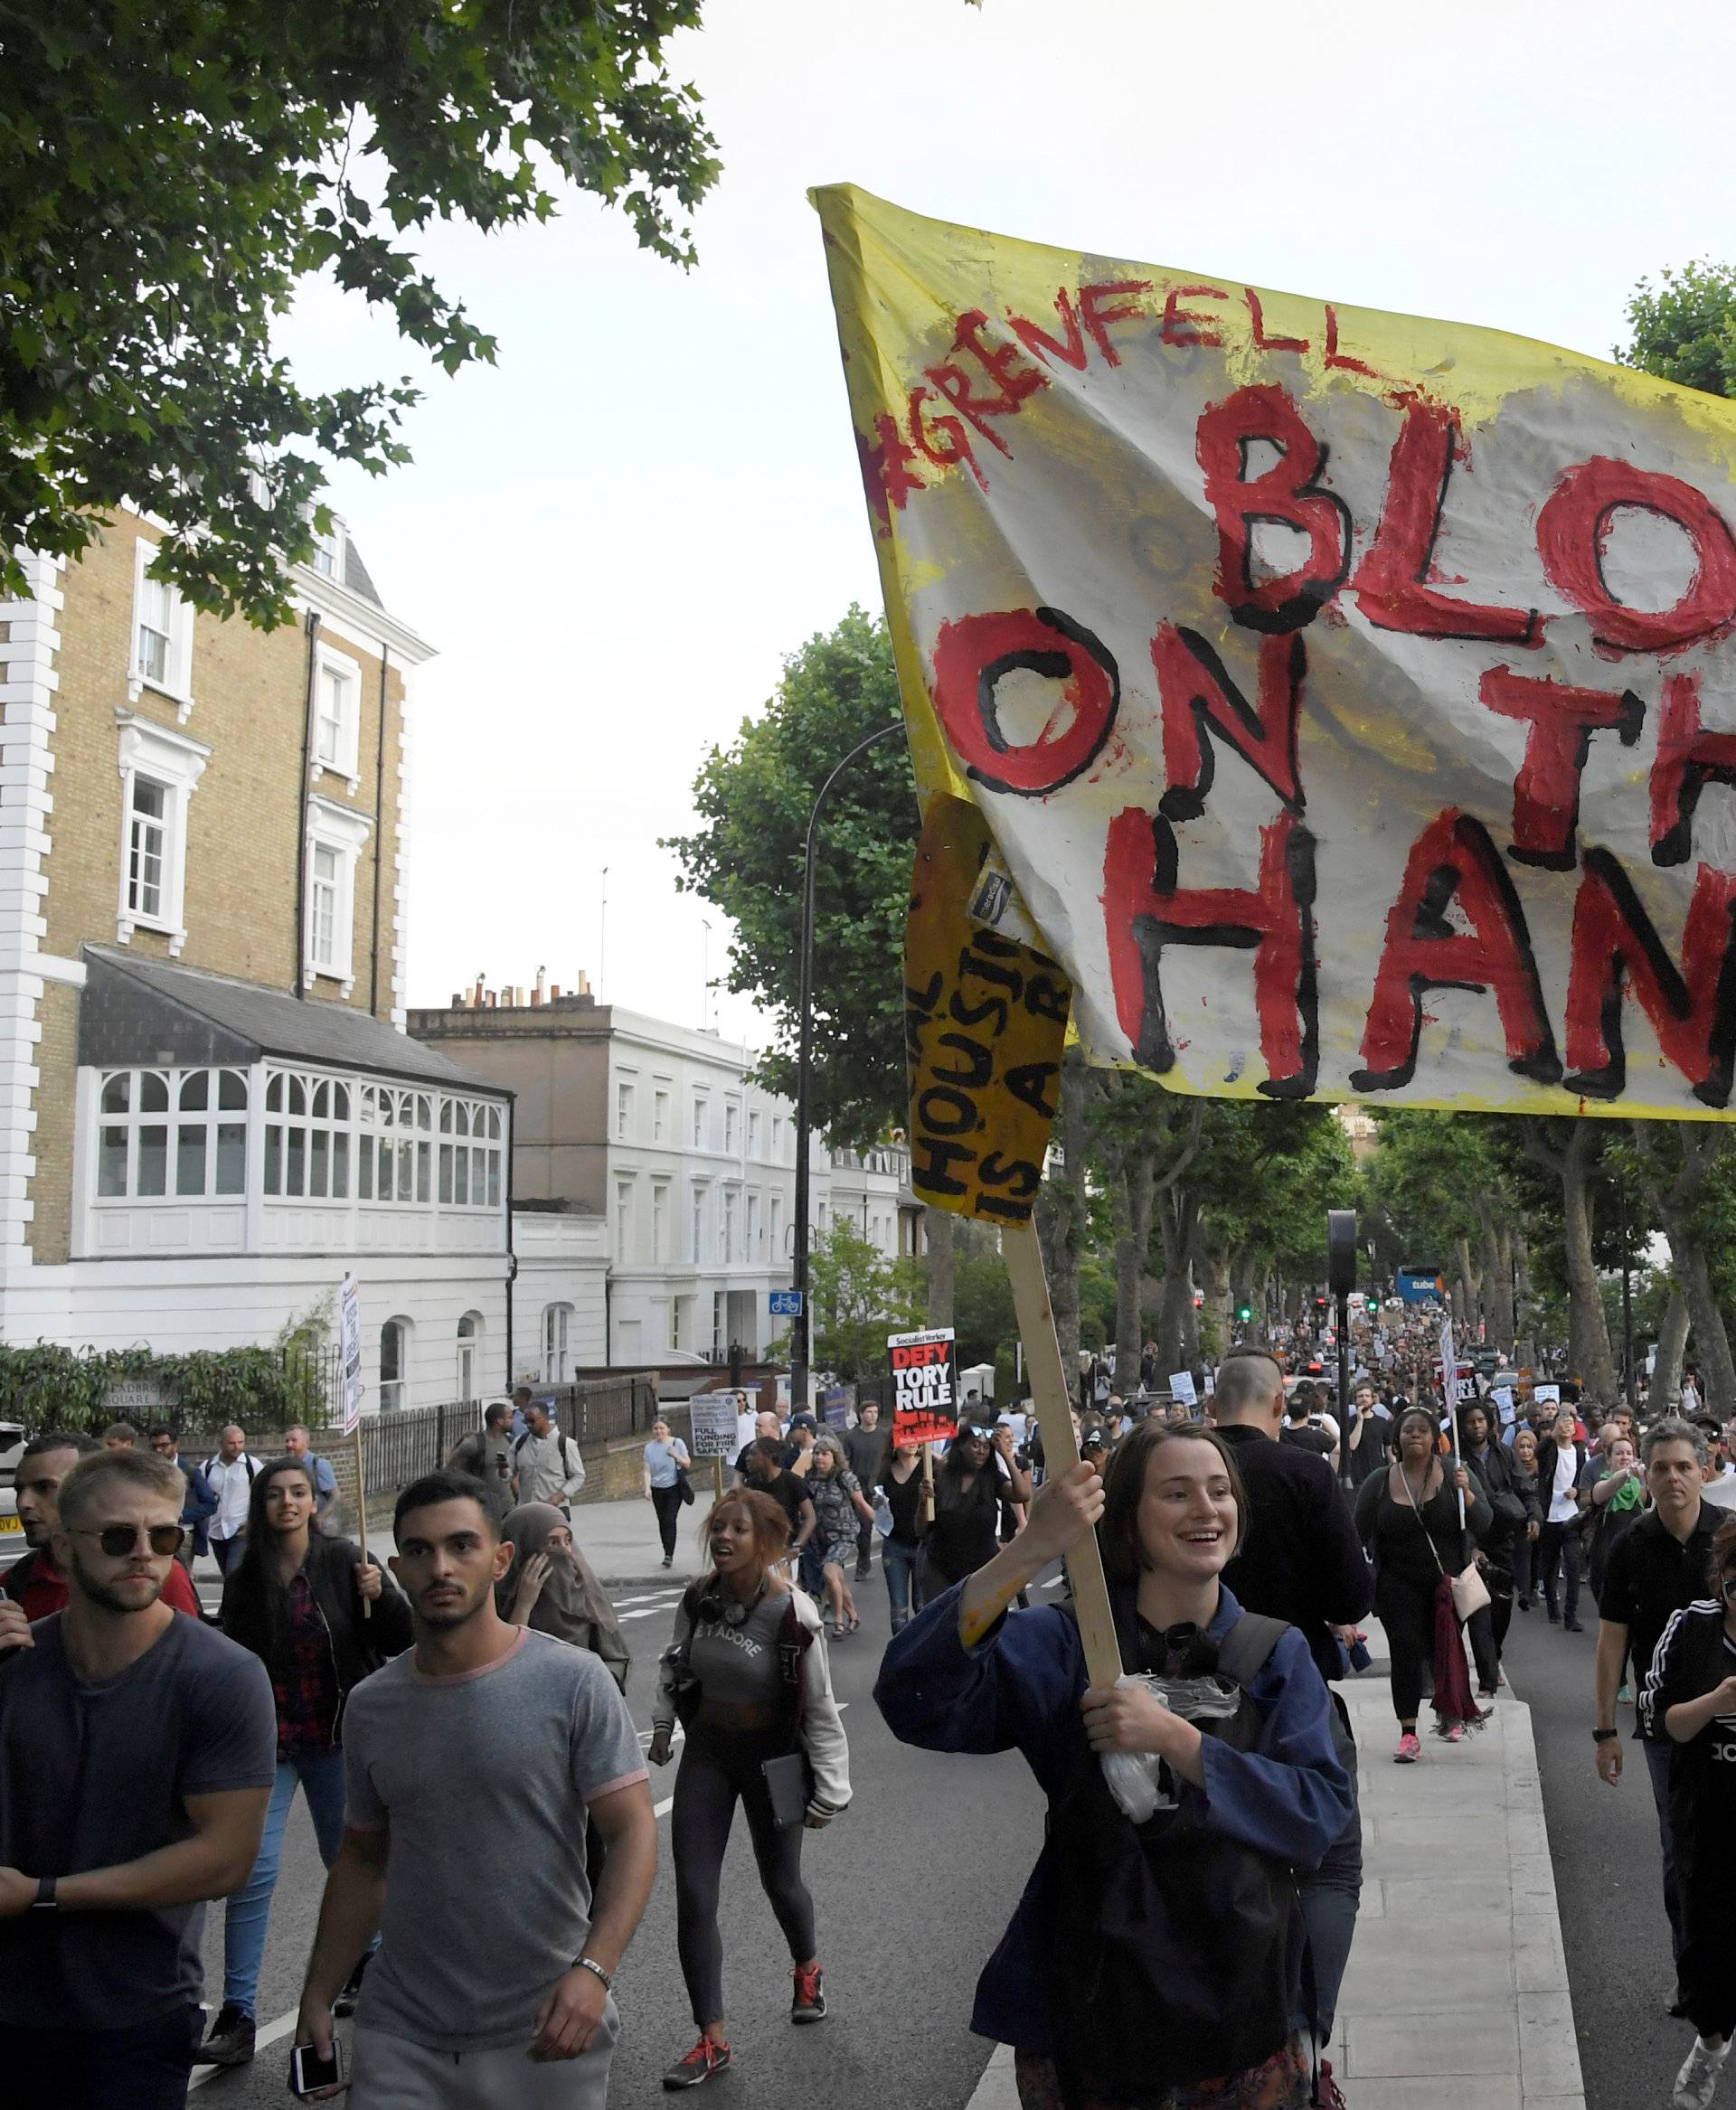 Demonstrators hold up banners during a march in Kensington, following the fire that destroyed The Grenfell Tower block, in north Kensington, West London